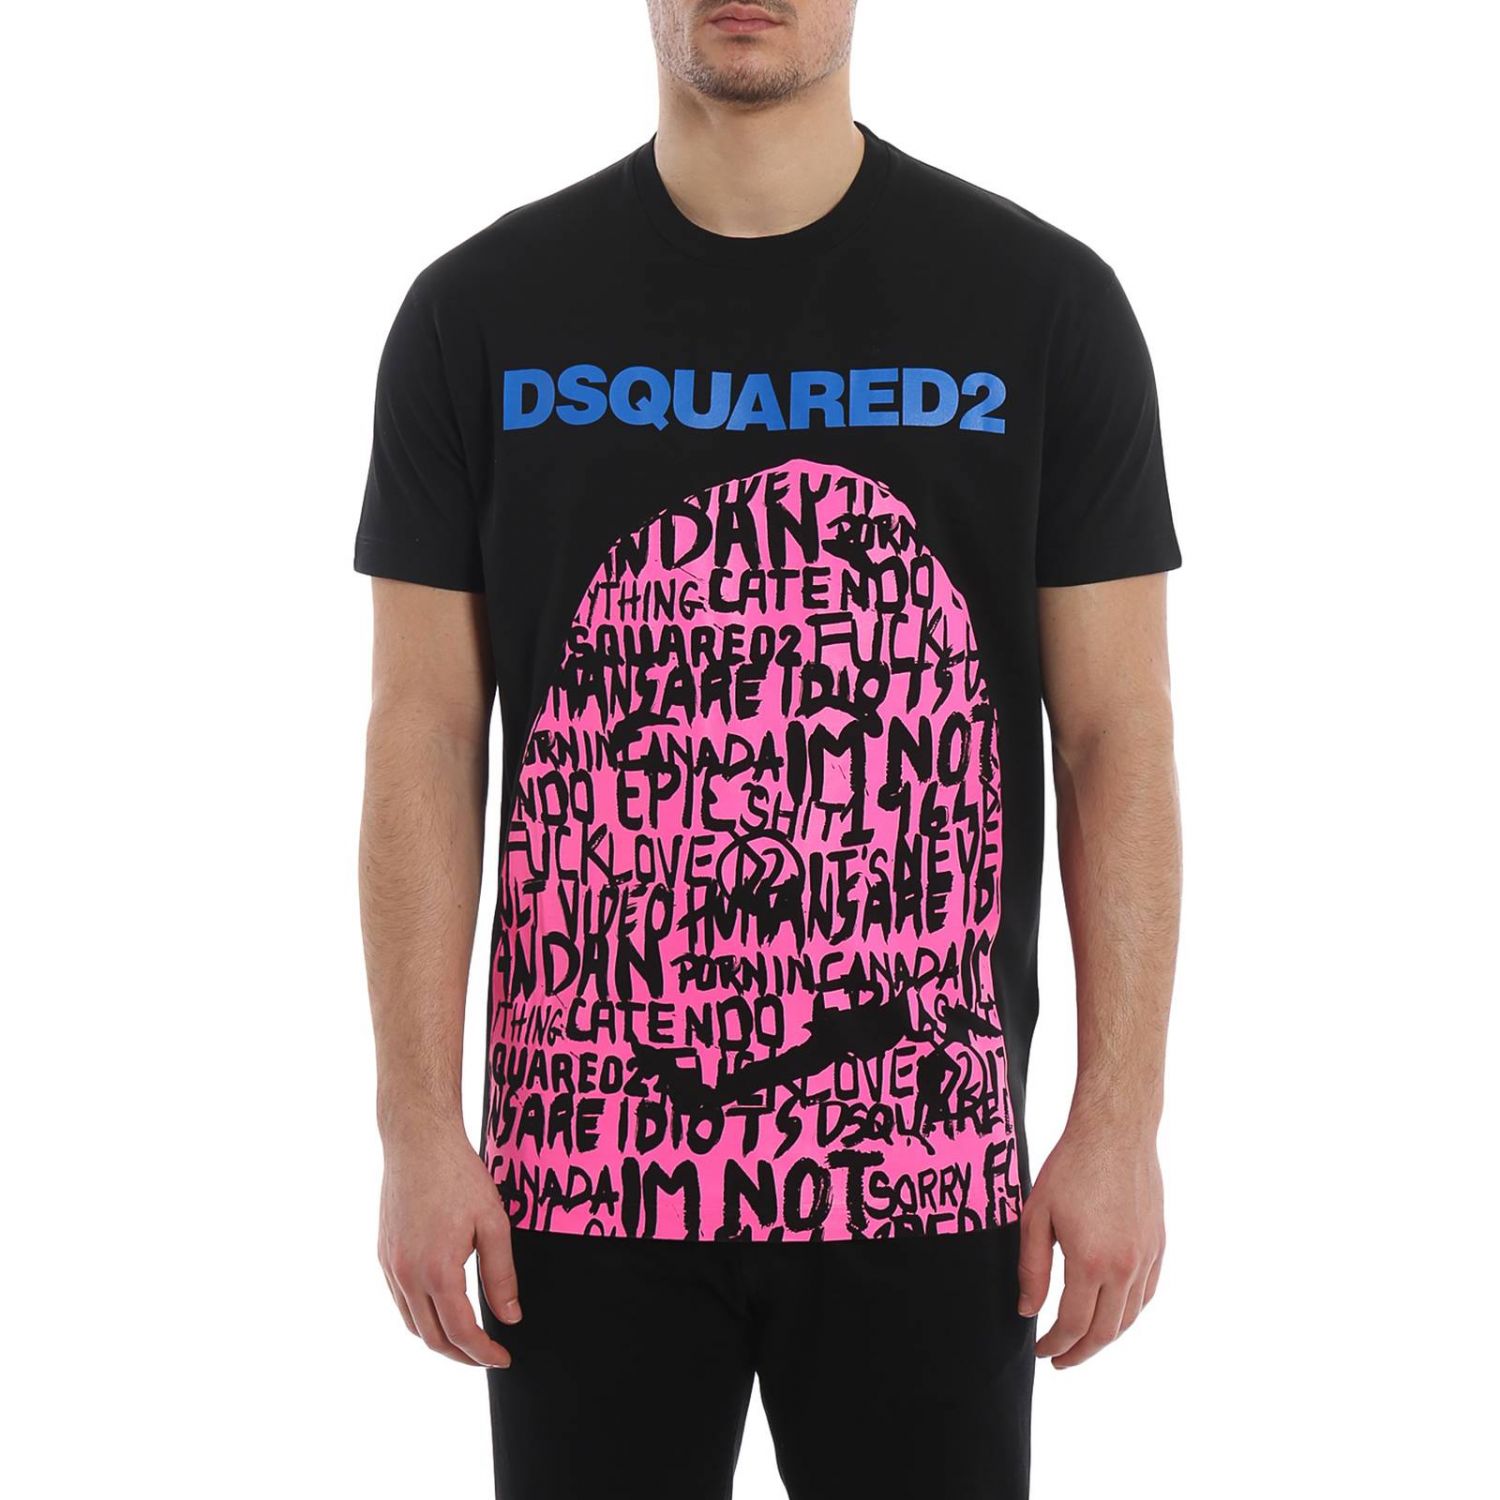 black and pink dsquared2 t shirt